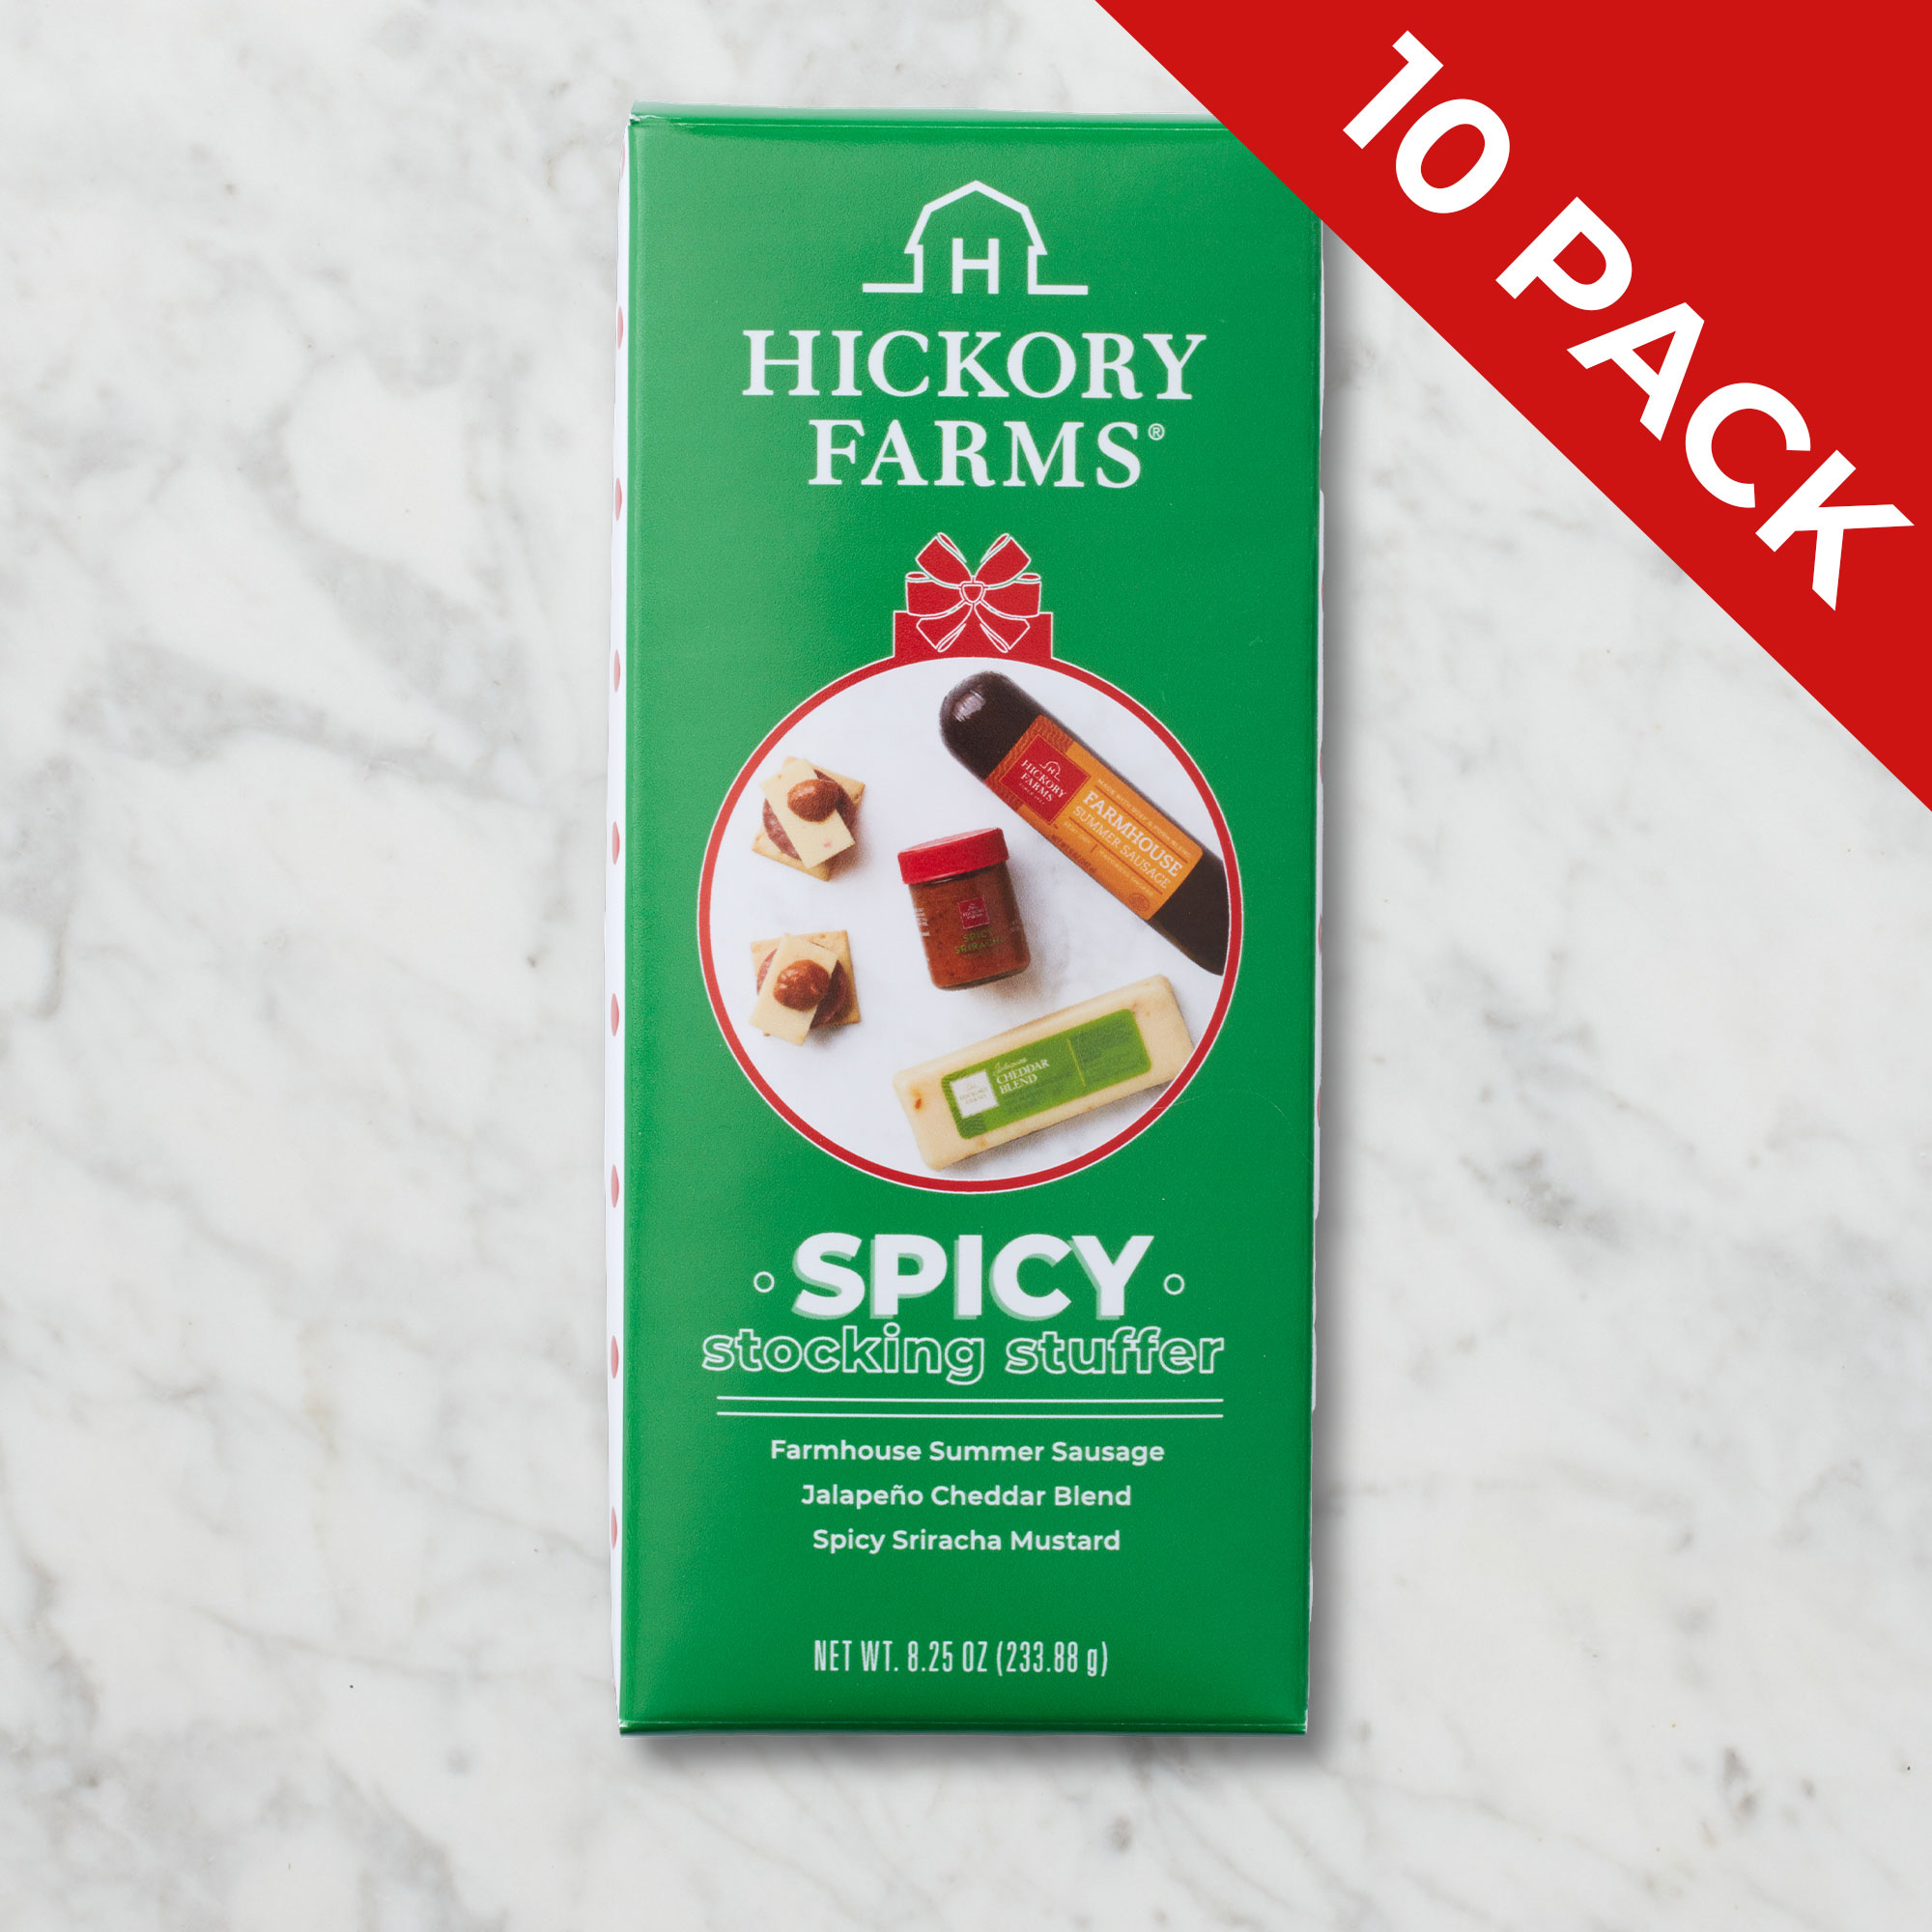 https://www.hickoryfarms.com/on/demandware.static/-/Sites-Web-Master-Catalog/default/dwb93fe800/images/products/spicy-stocking-stuffer-10-pack-017001-1.jpg